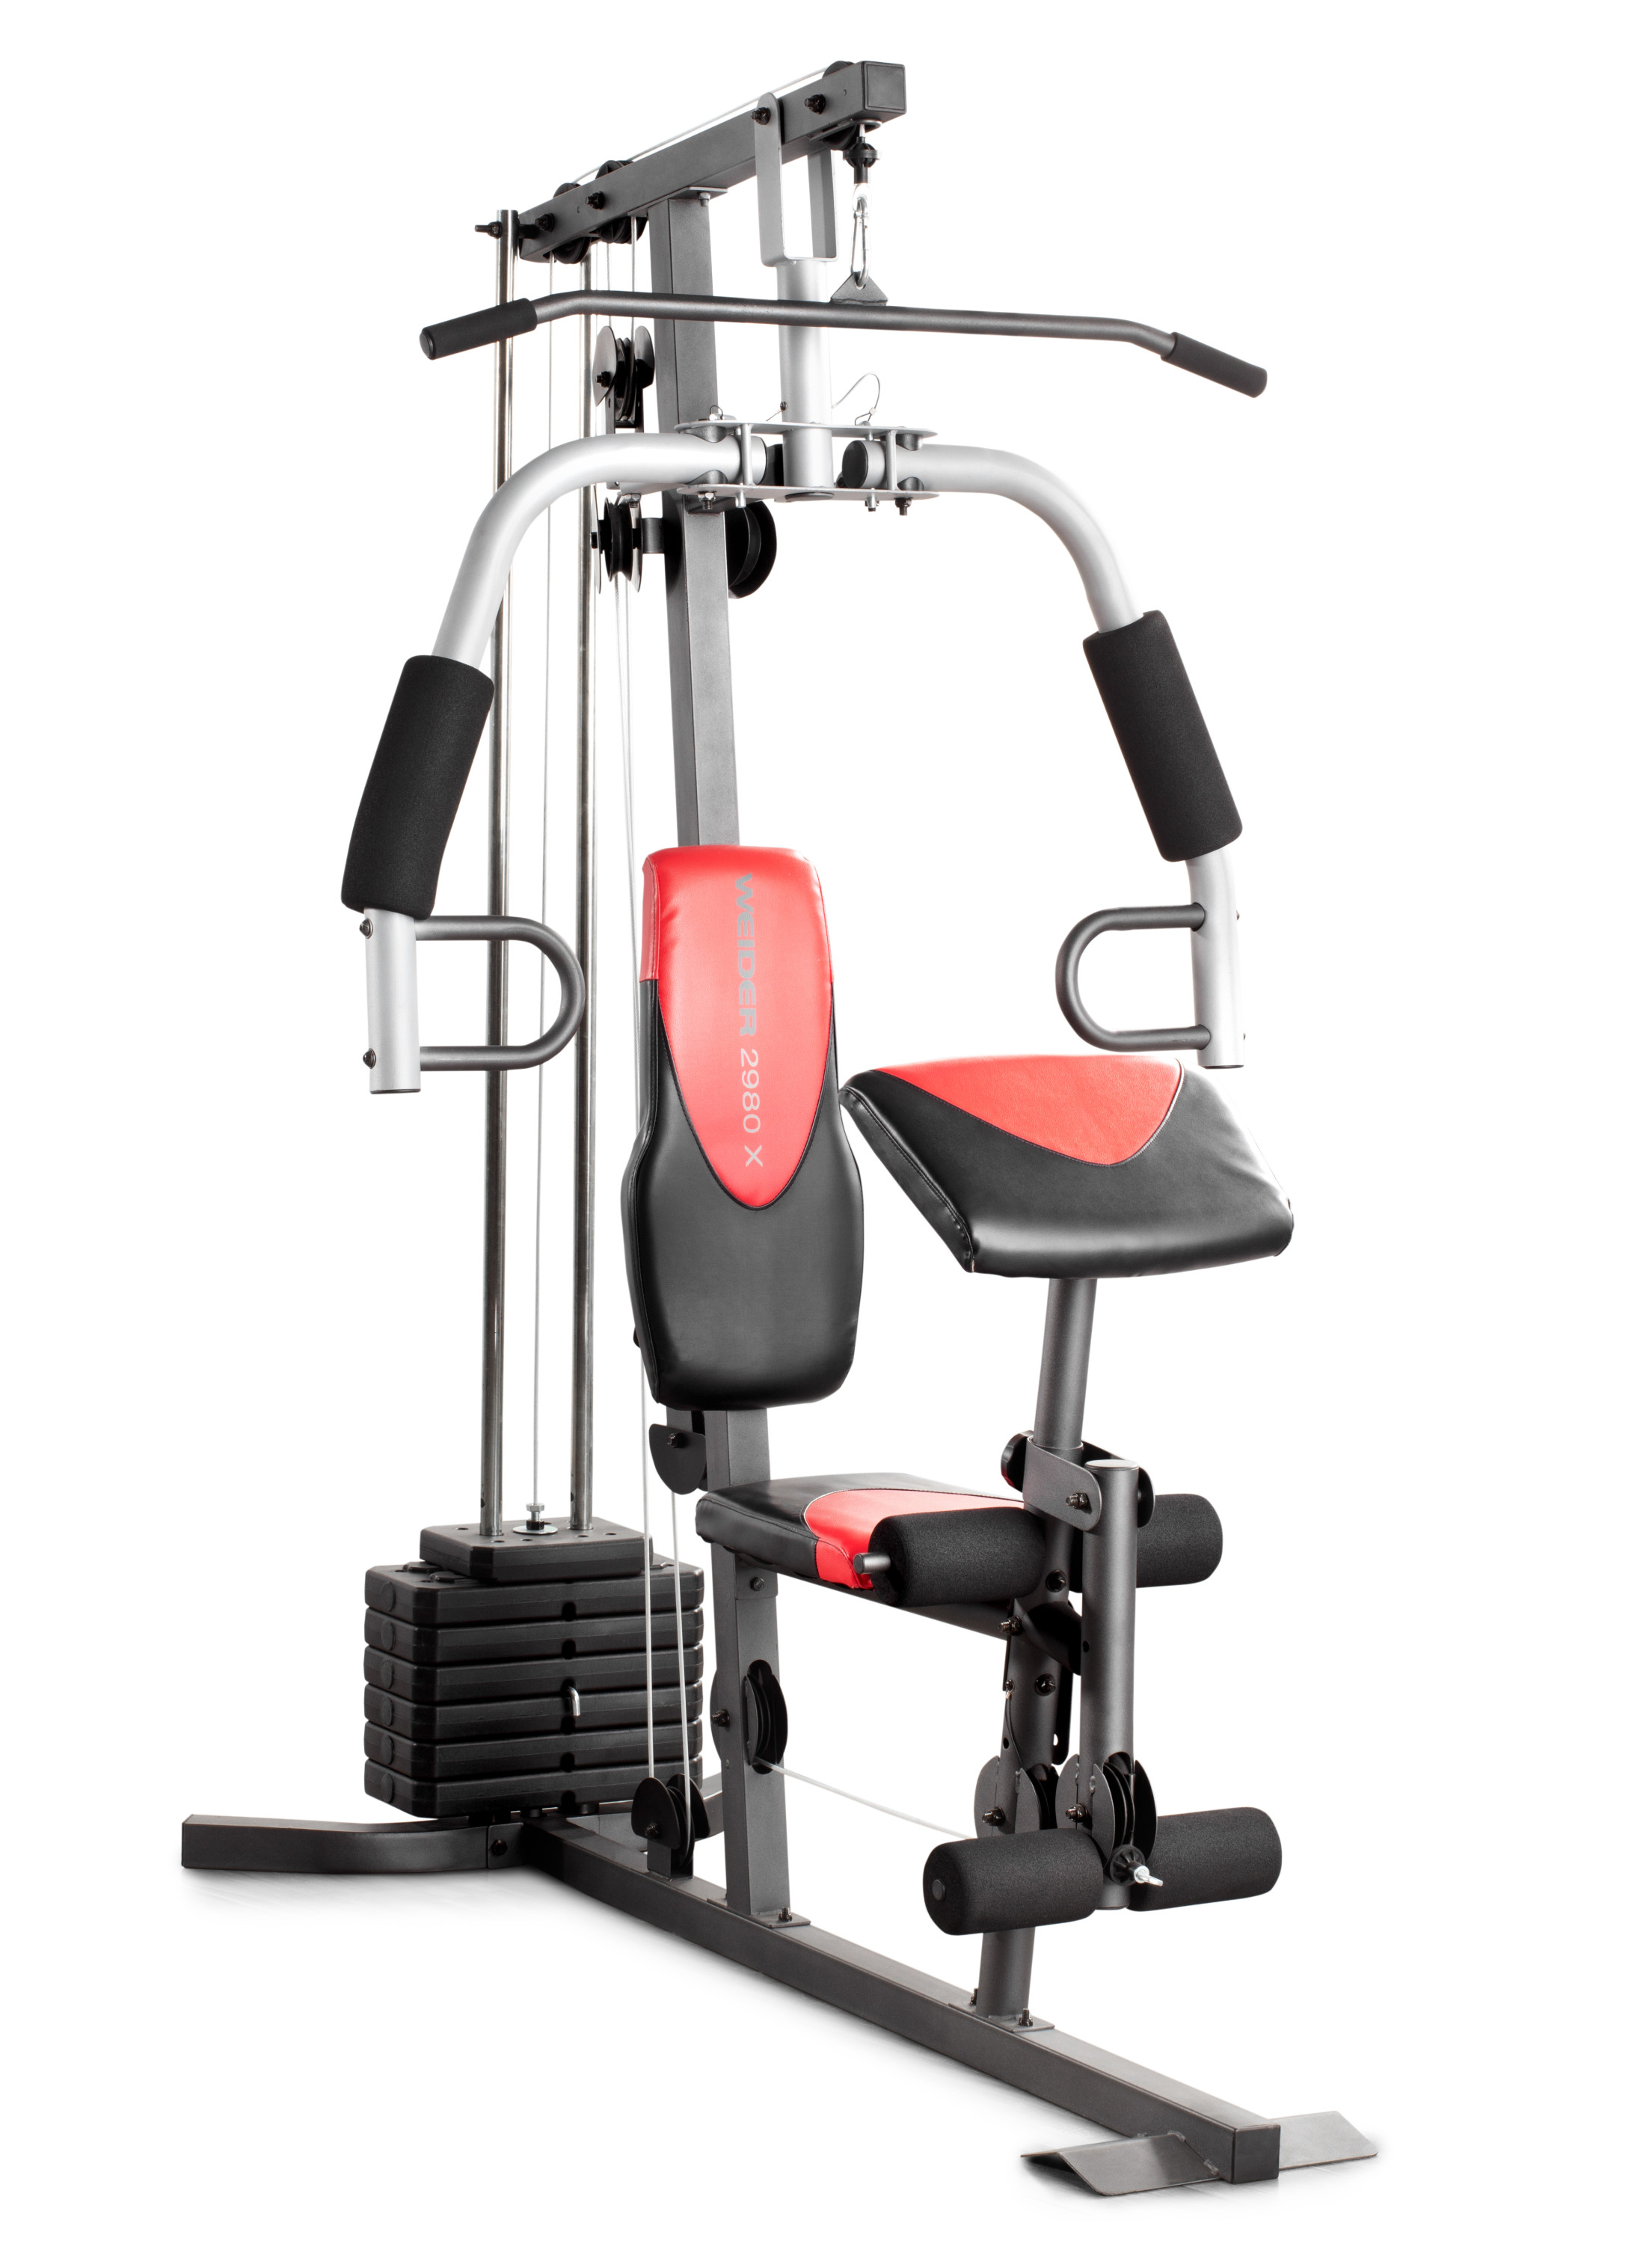 Weider 2980 X Home Gym System with 80 Lb. Vinyl Weight Stack - image 1 of 26